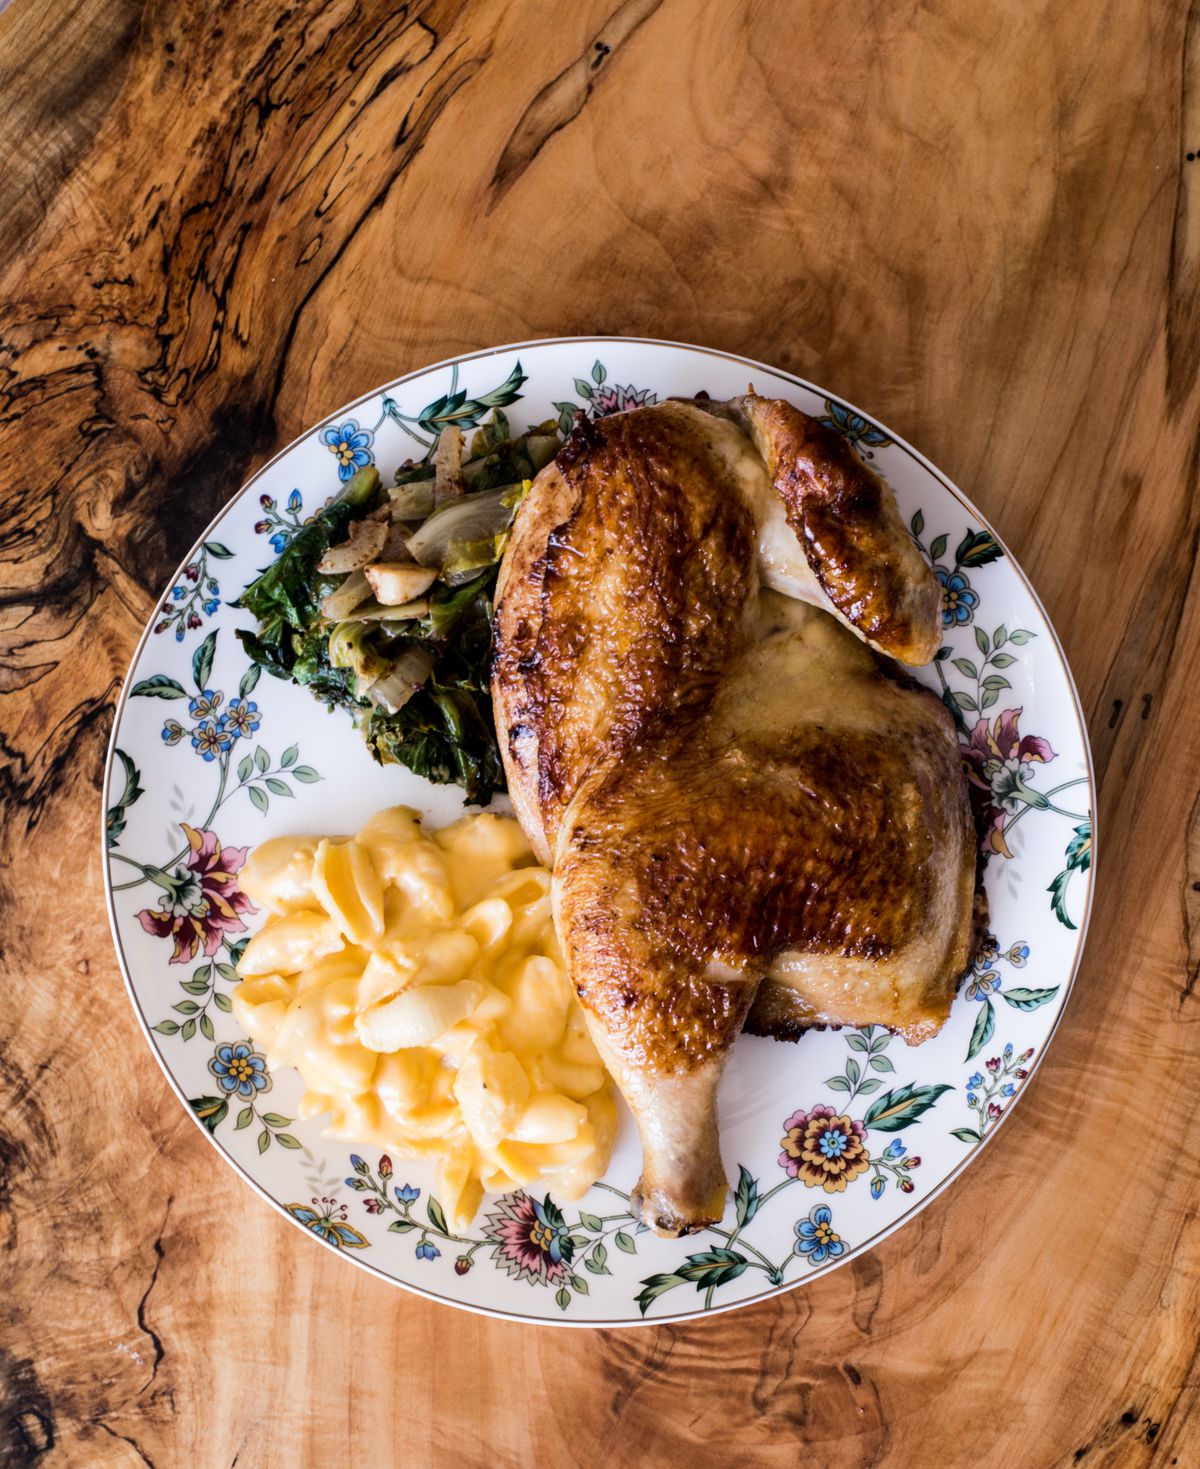 Roasted chicken with Brussels sprouts and mac and cheese on a floral plate.